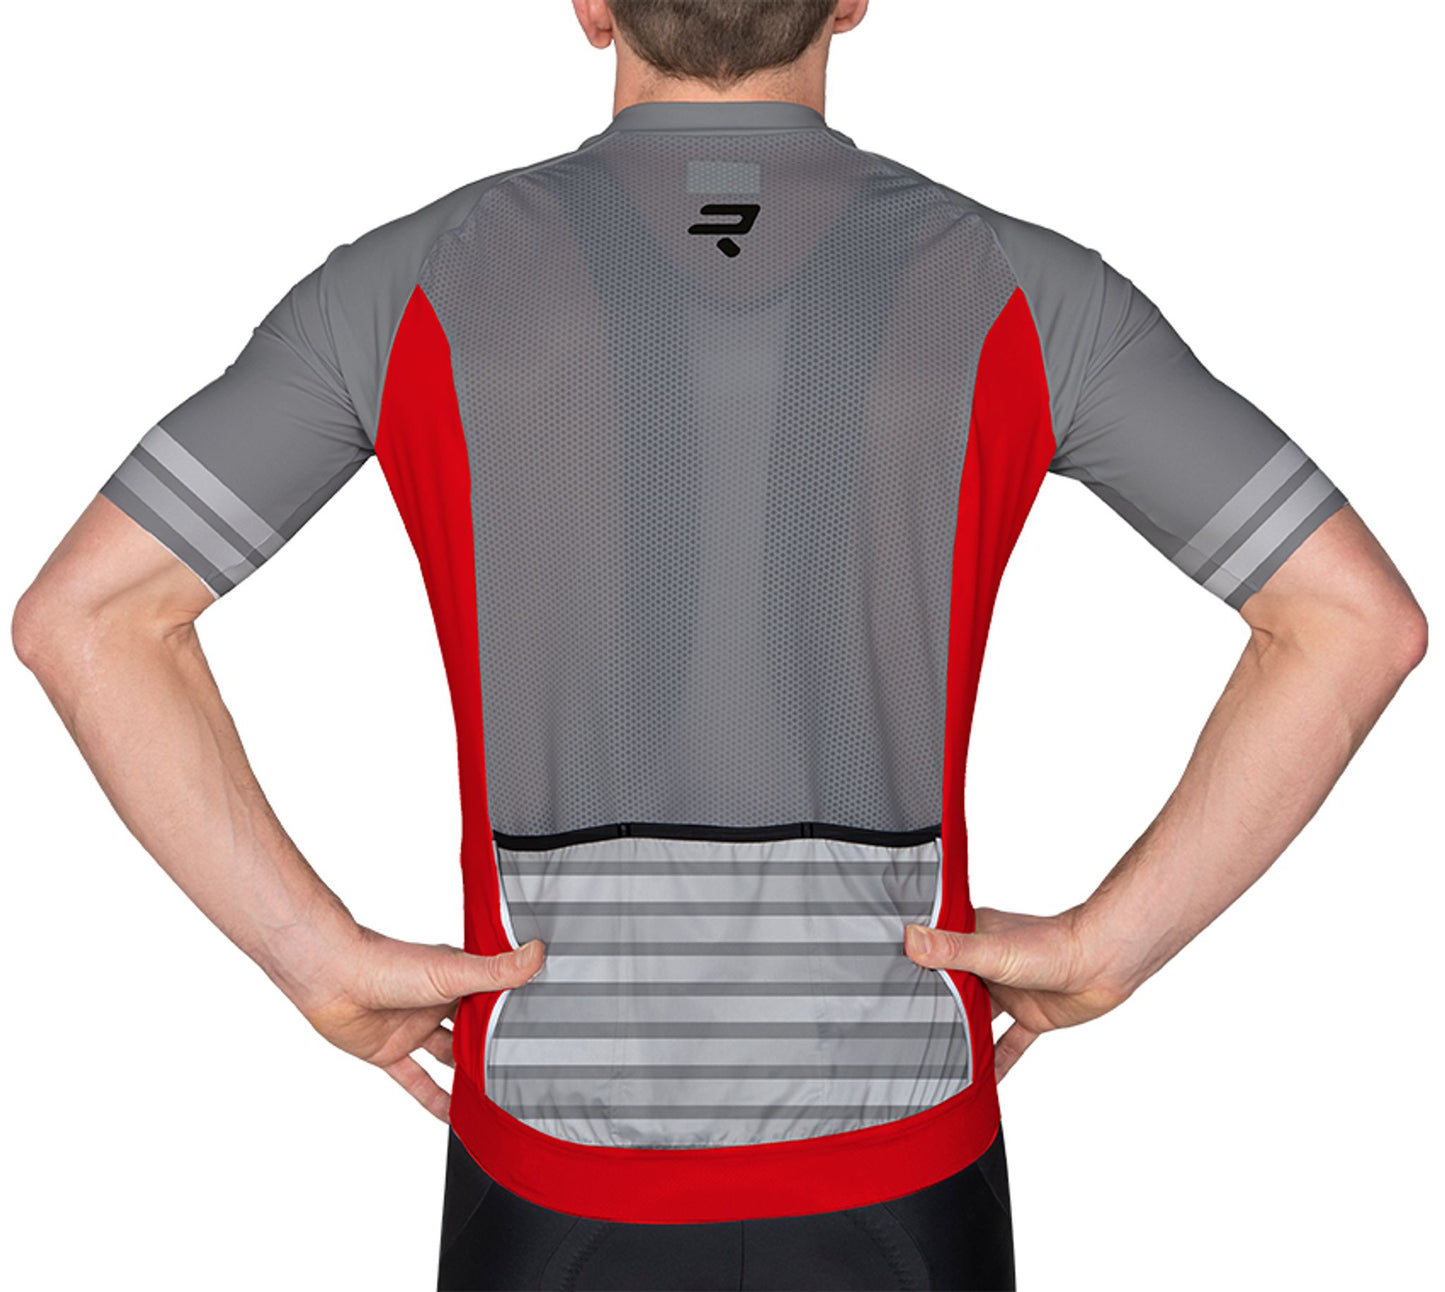 RIDLEY - JERSEY - PERF. R22 - GREY/RED